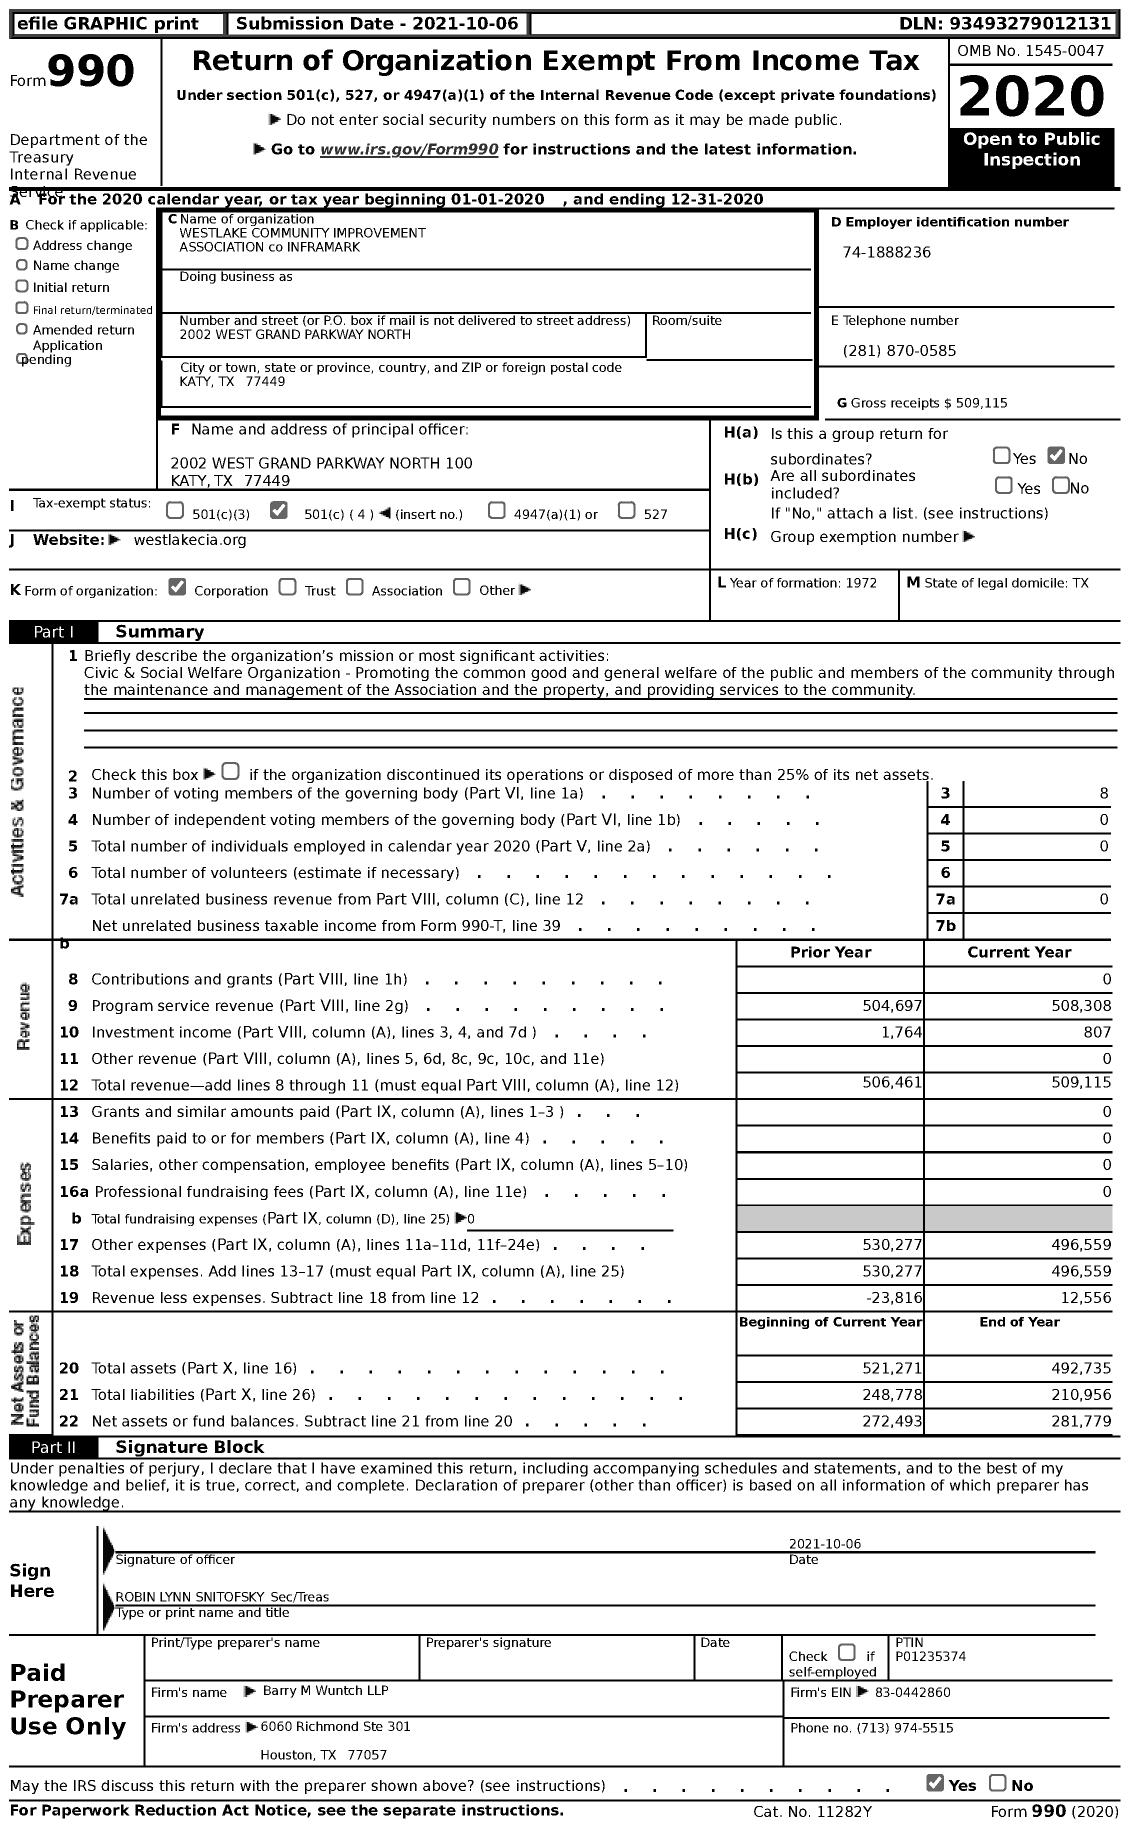 Image of first page of 2020 Form 990 for Westlake Community Improvement Association Co Inframark